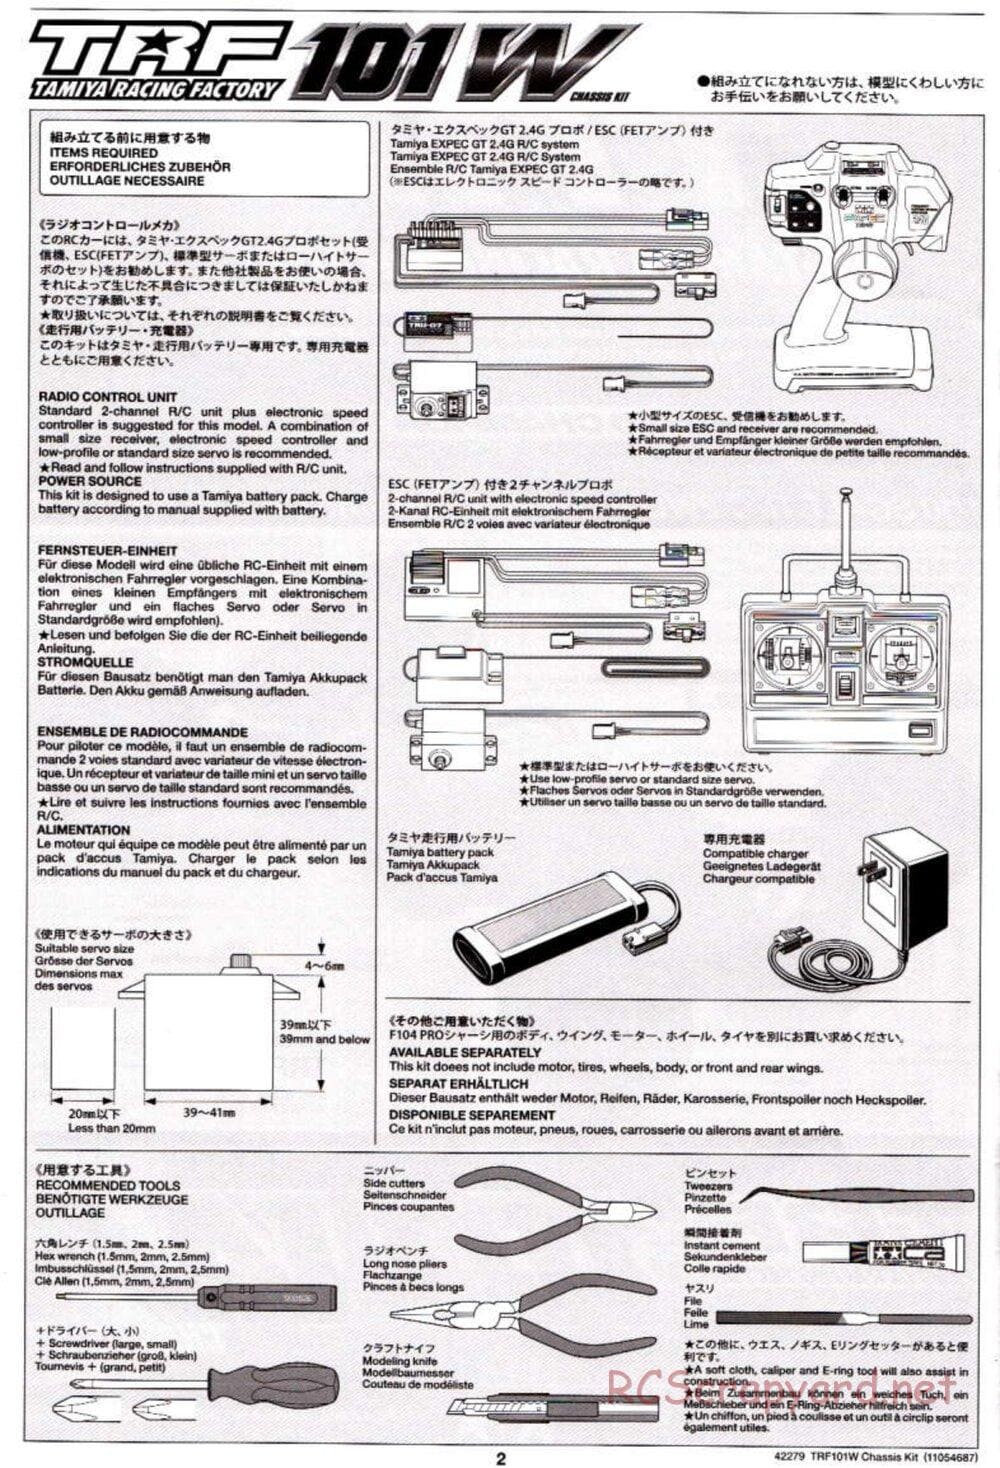 Tamiya - TRF101W Chassis Chassis - Manual - Page 2